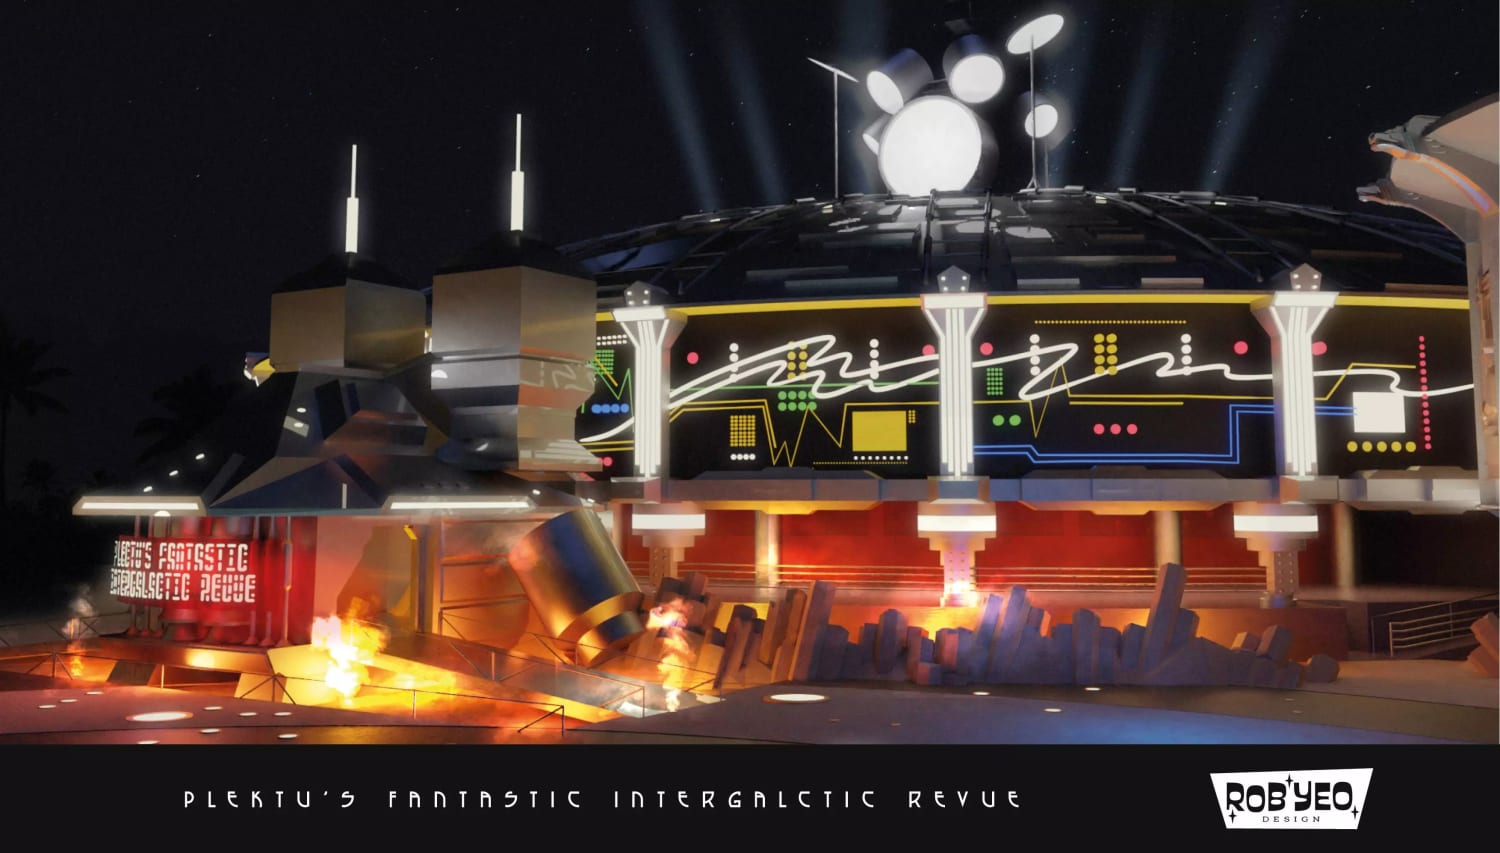 "Plactu's Fantastic Intergalactic Revue" would have been a musical animatronic show for Tomorrowland in the 1990s.